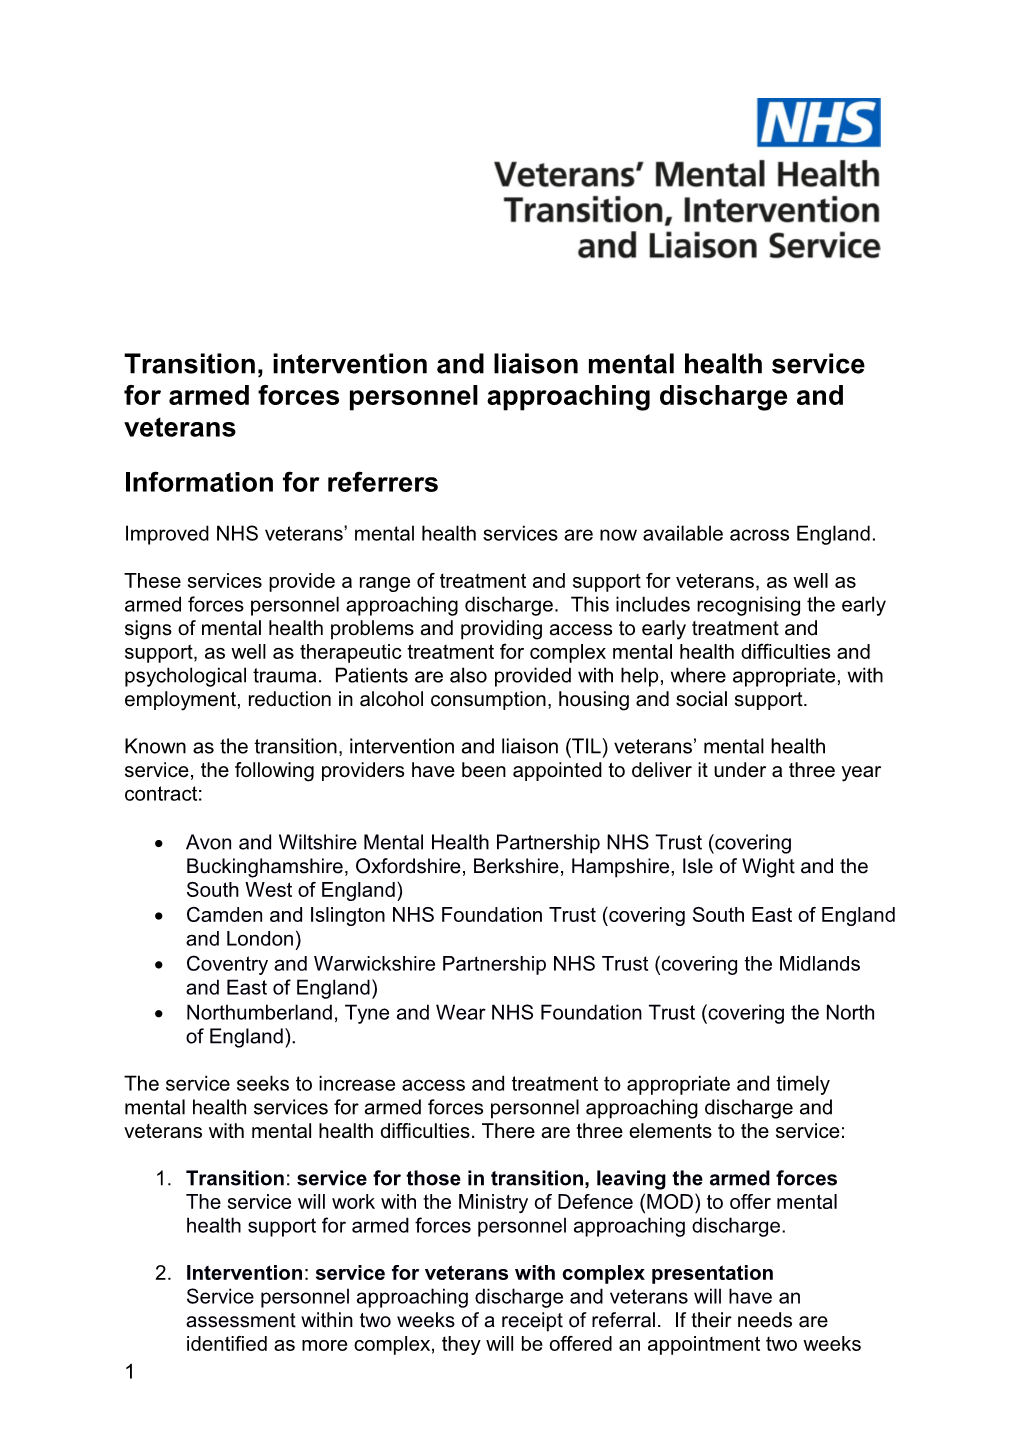 Transition, Intervention and Liaison Mental Health Service for Armed Forces Personnel